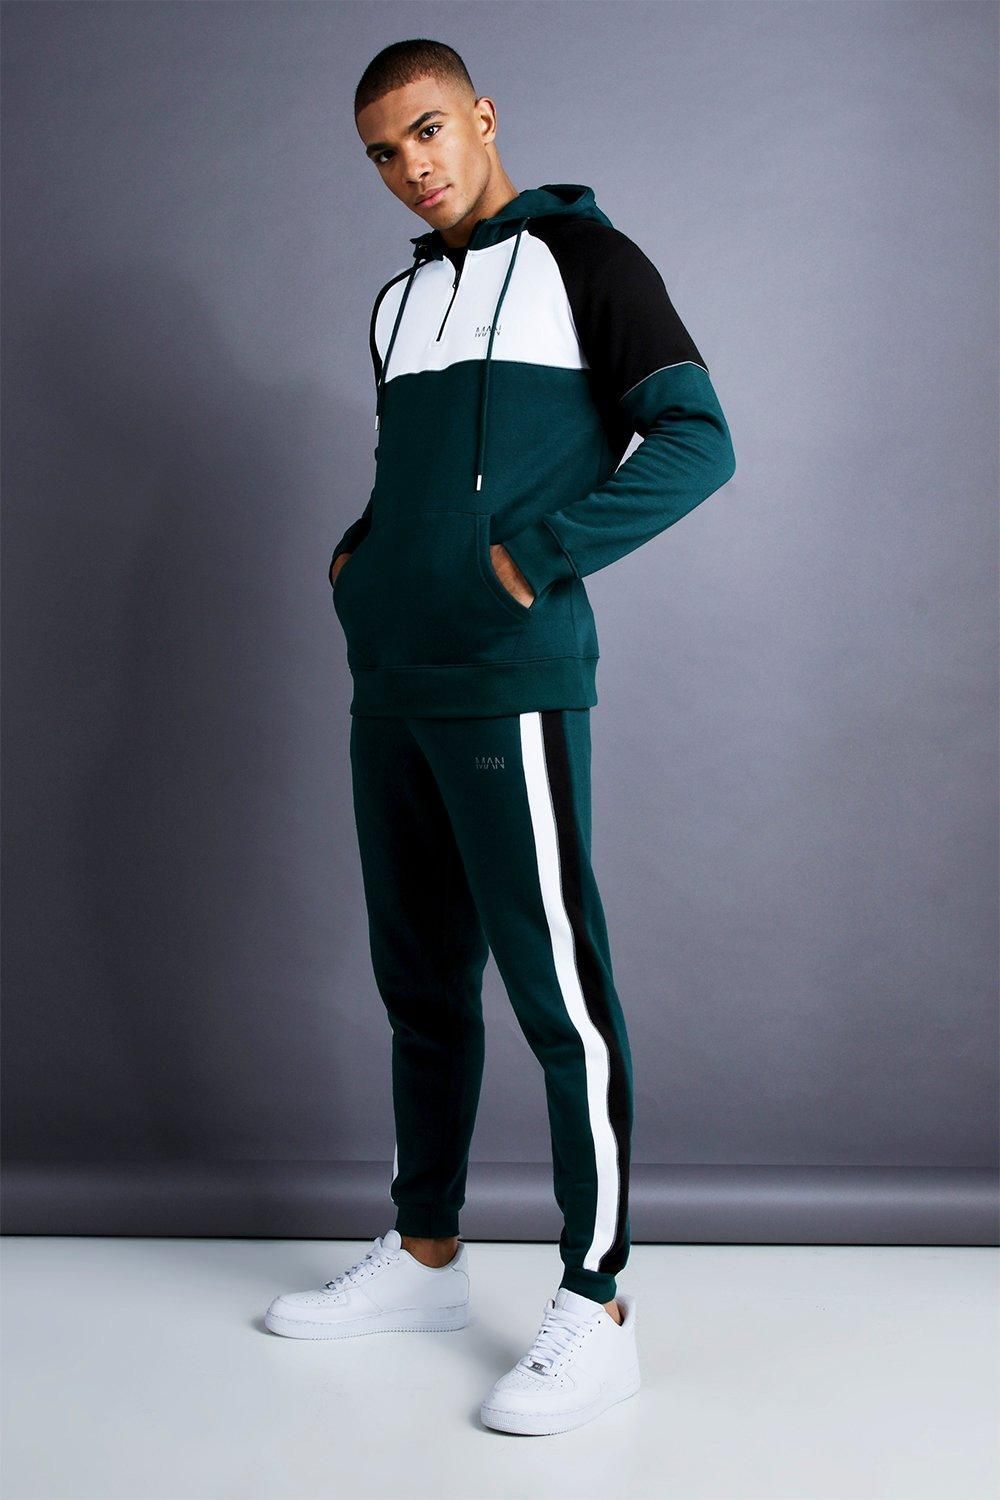 MAN Skinny Fit 1/4 Zip Panelled Tracksuit | boohoo - MAN Skinny Fit 1/4 Zip Panelled Tracksuit | boohoo -   16 fitness Men outfit ideas